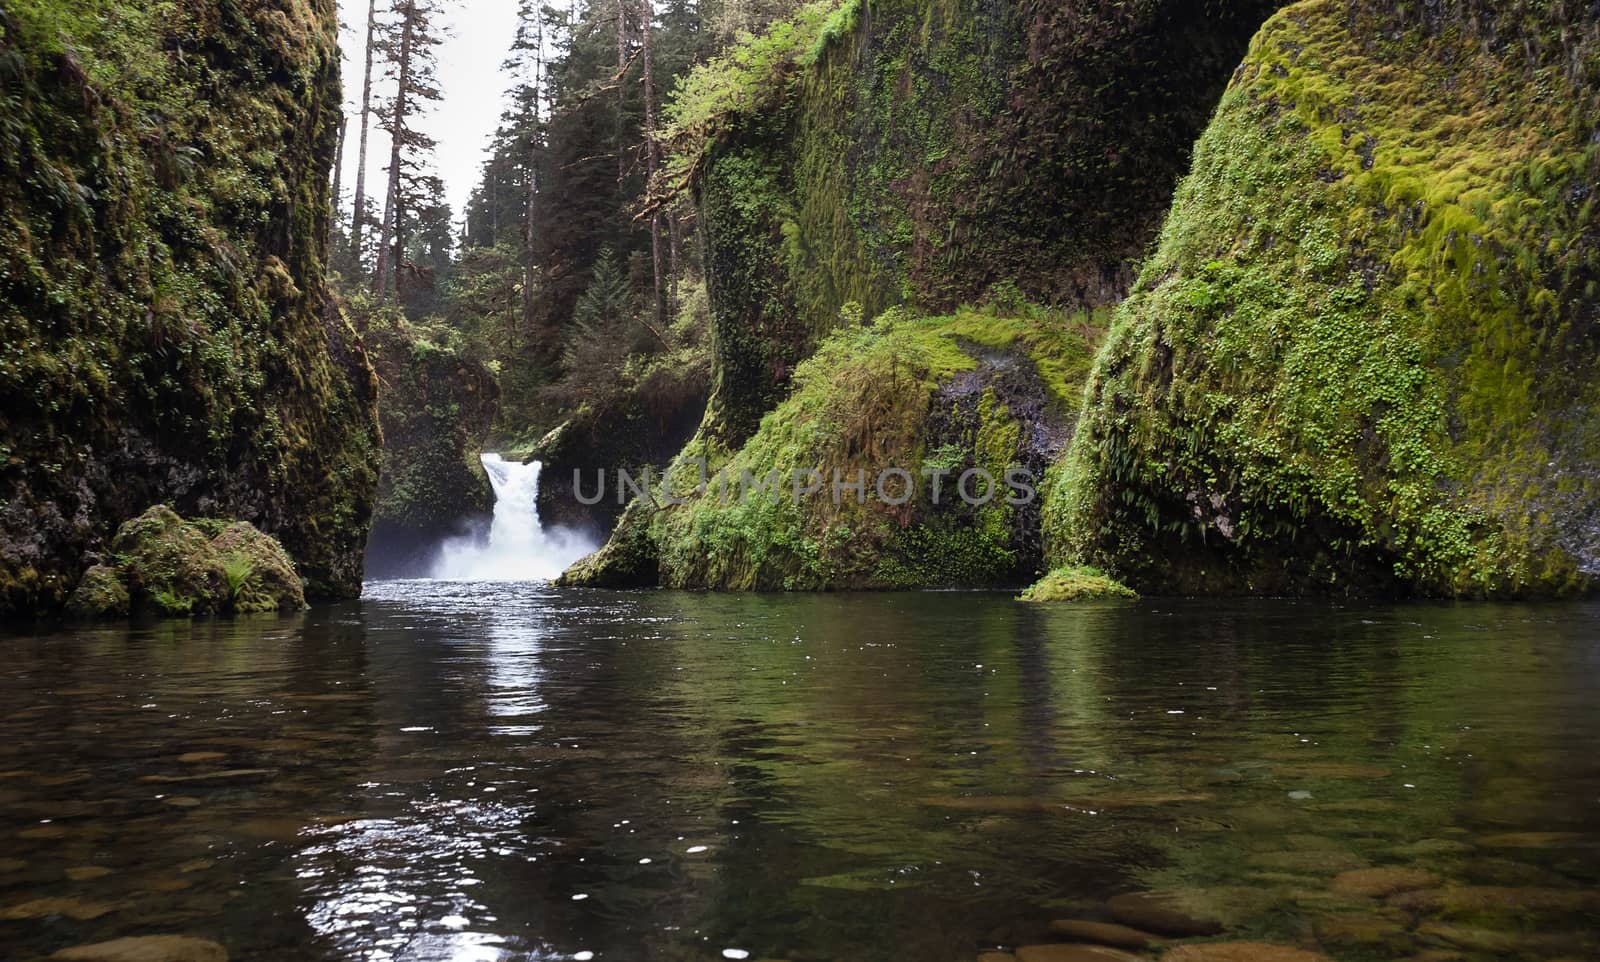 Standing in Water Punch Bowl Falls Columbia River Gorge by ChrisBoswell